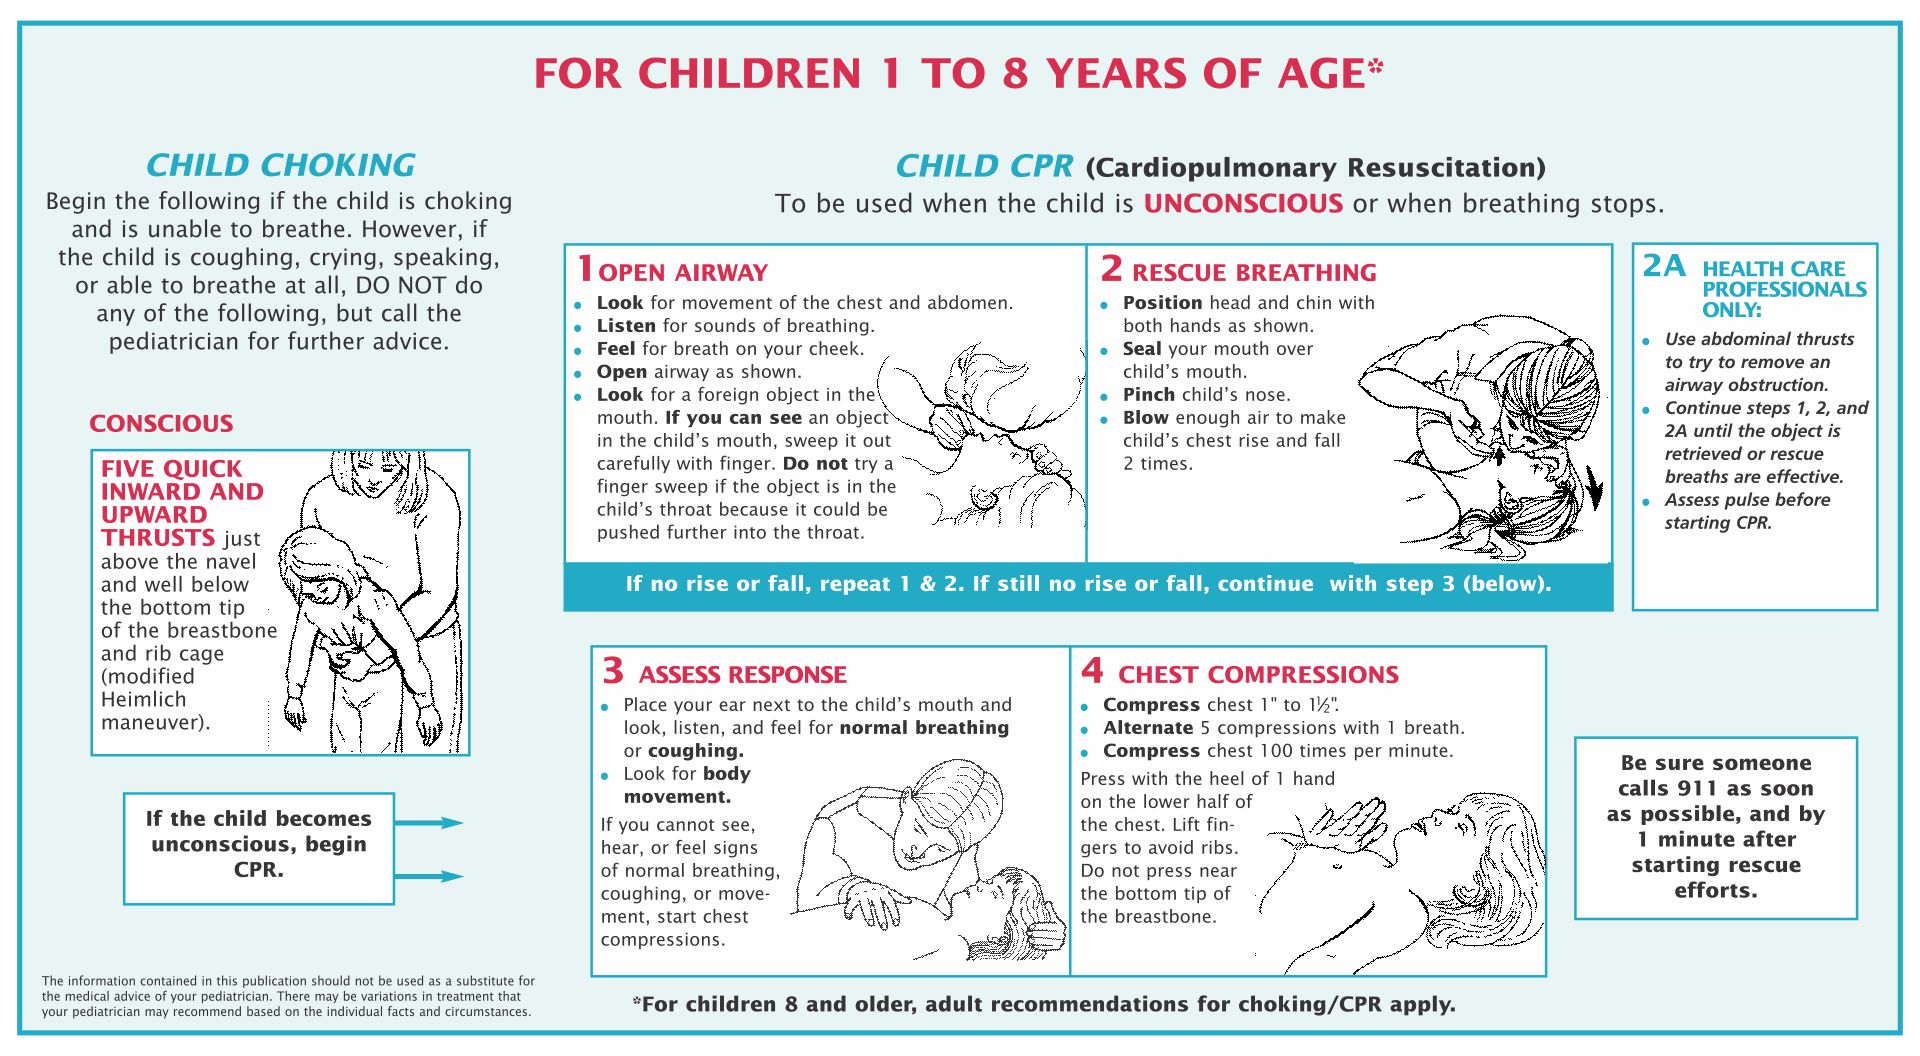 Printable First Aid for Children